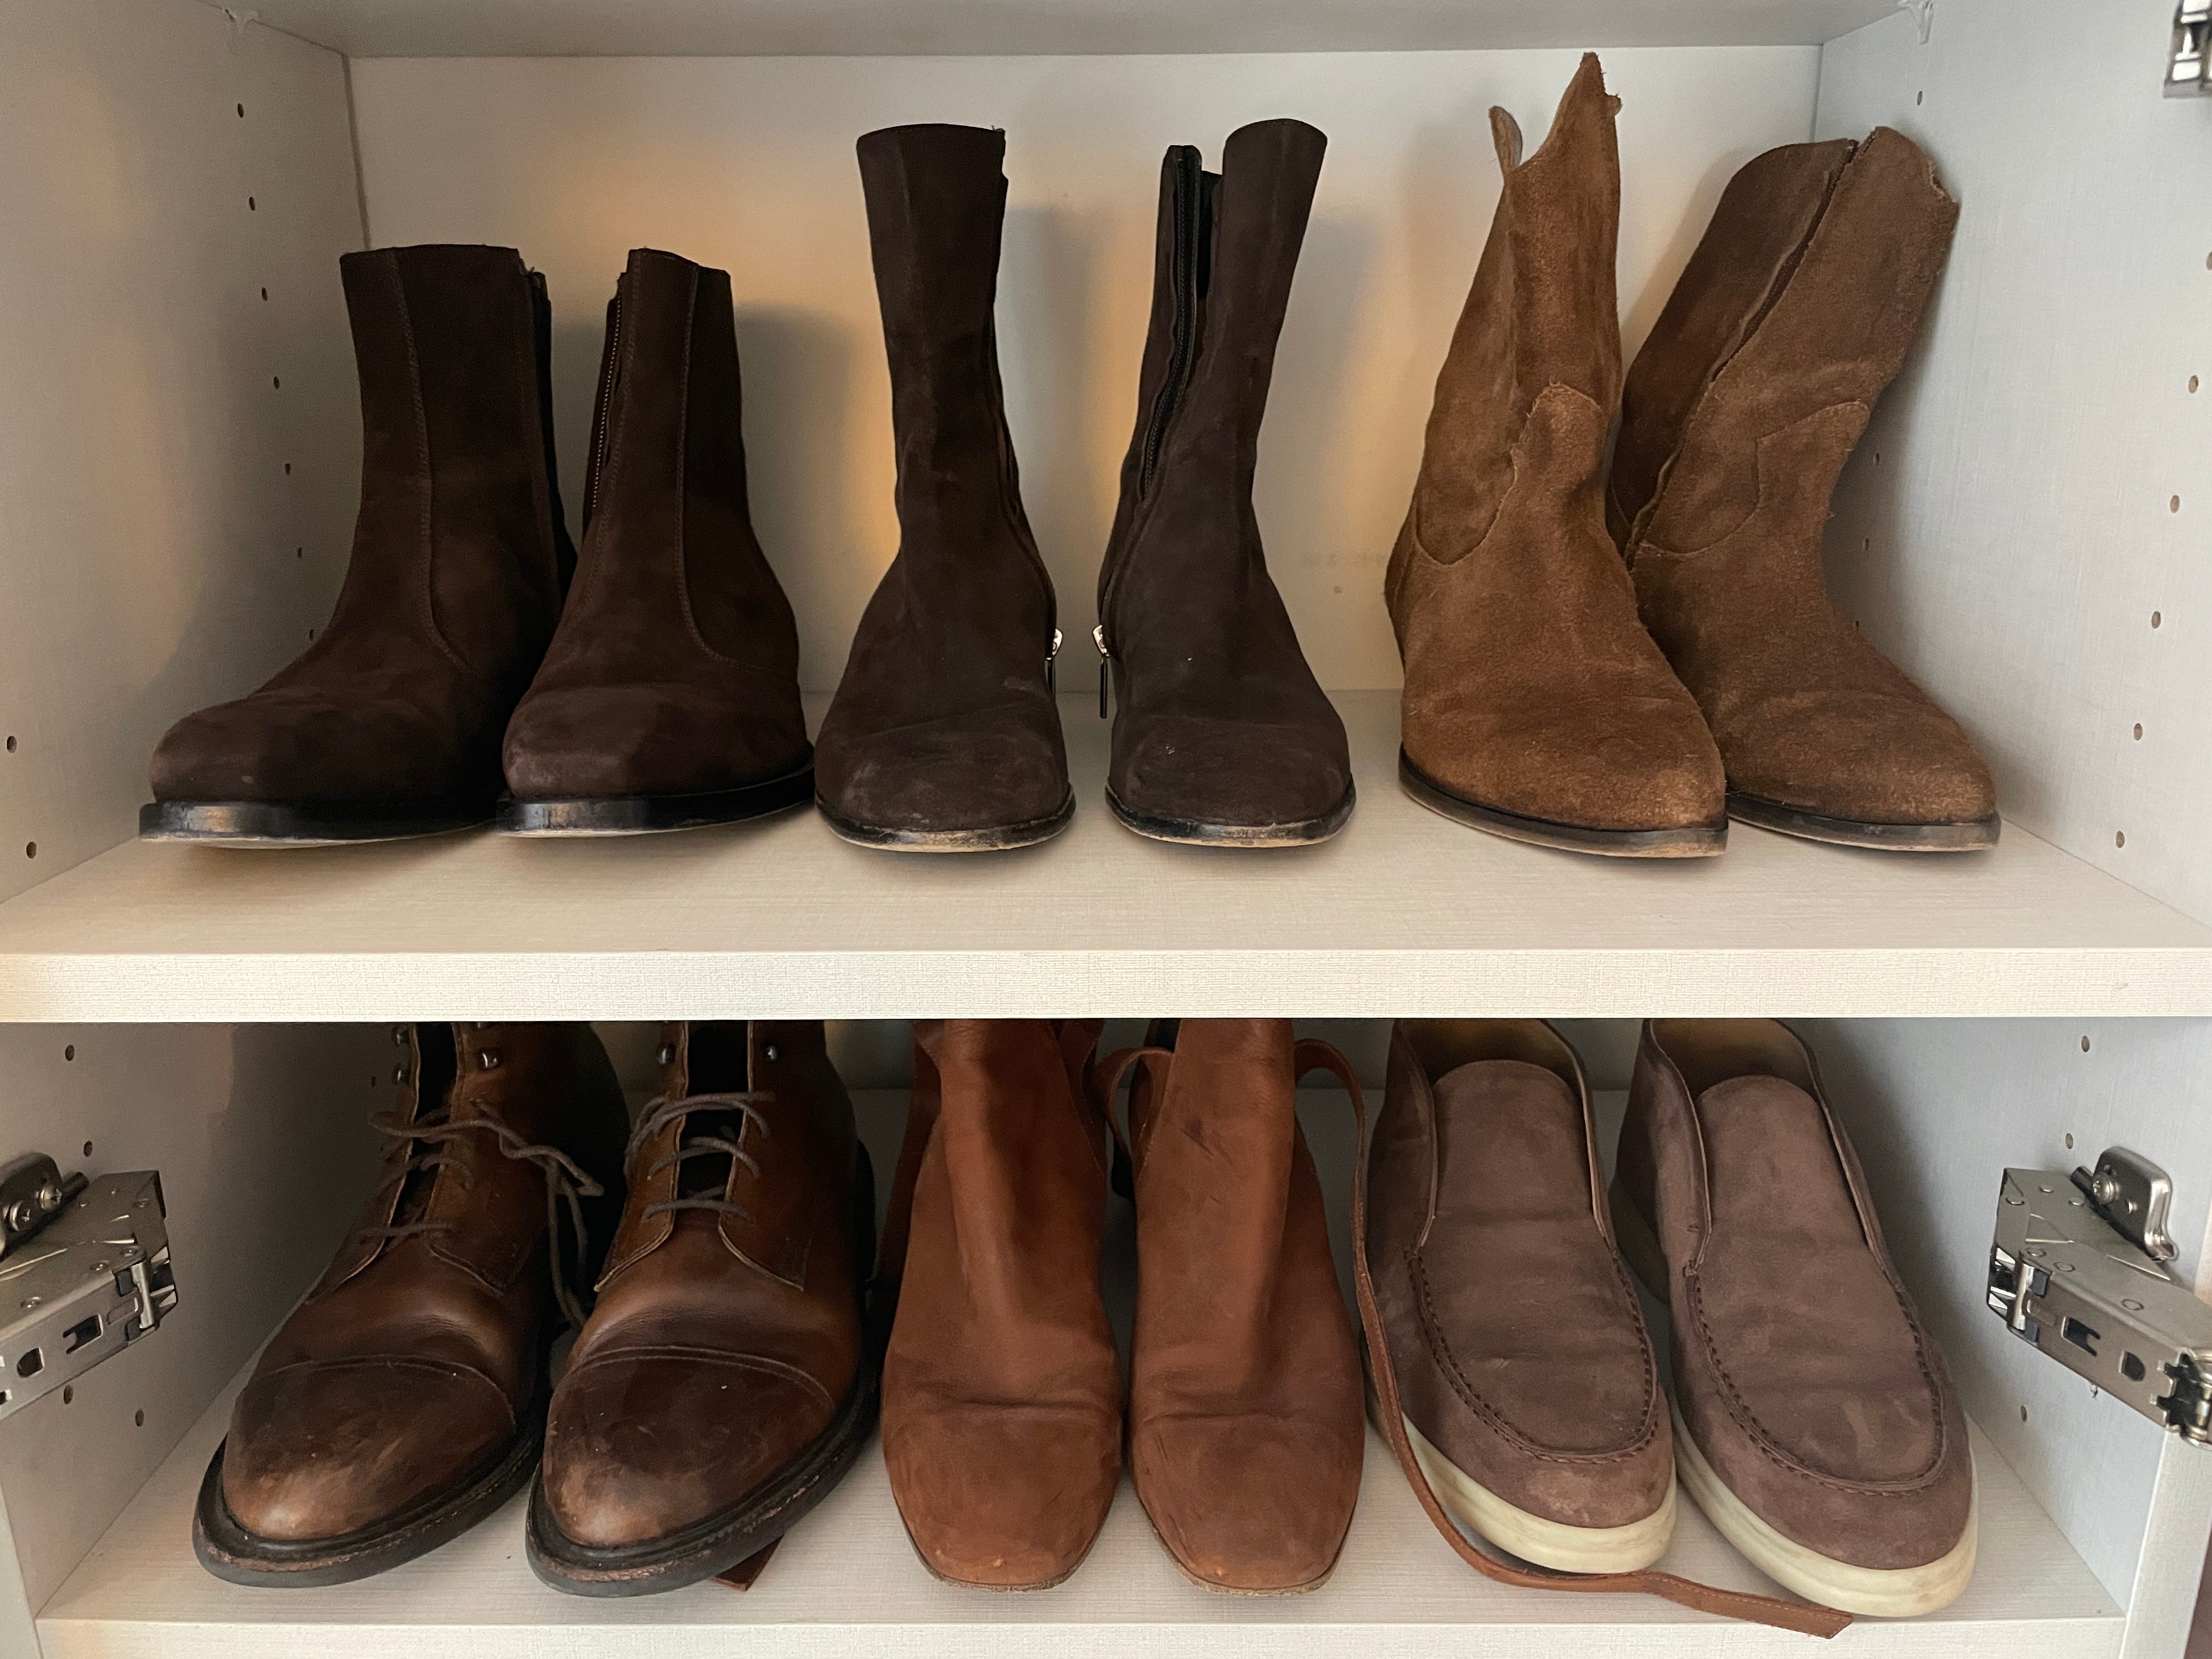 A Complete Boot Wardrobe - by Becky Malinsky